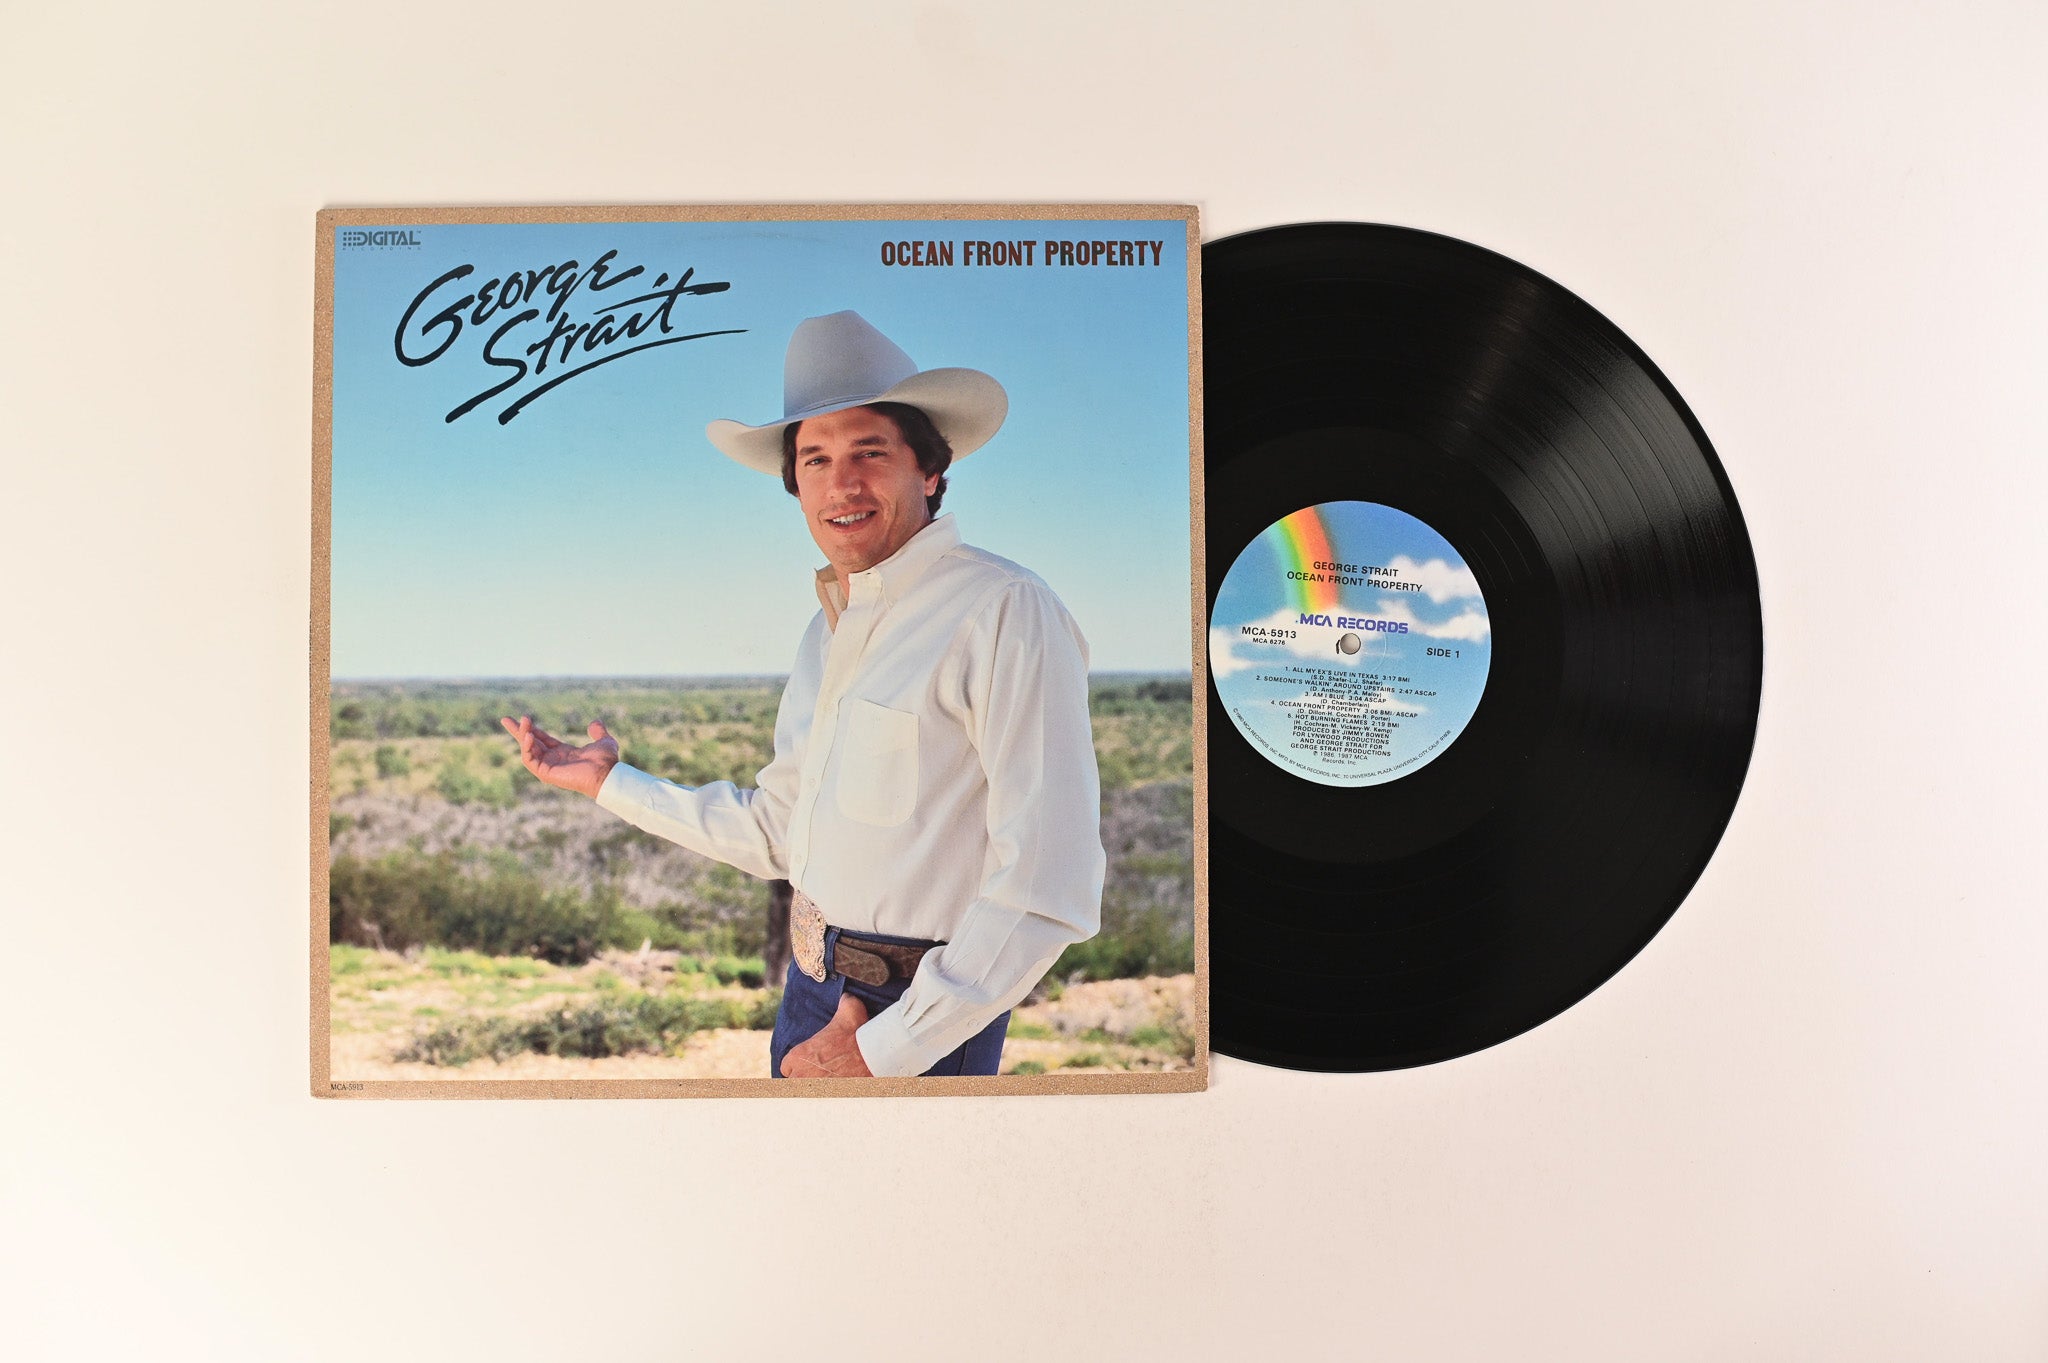 George Strait - Ocean Front Property on MCA Records